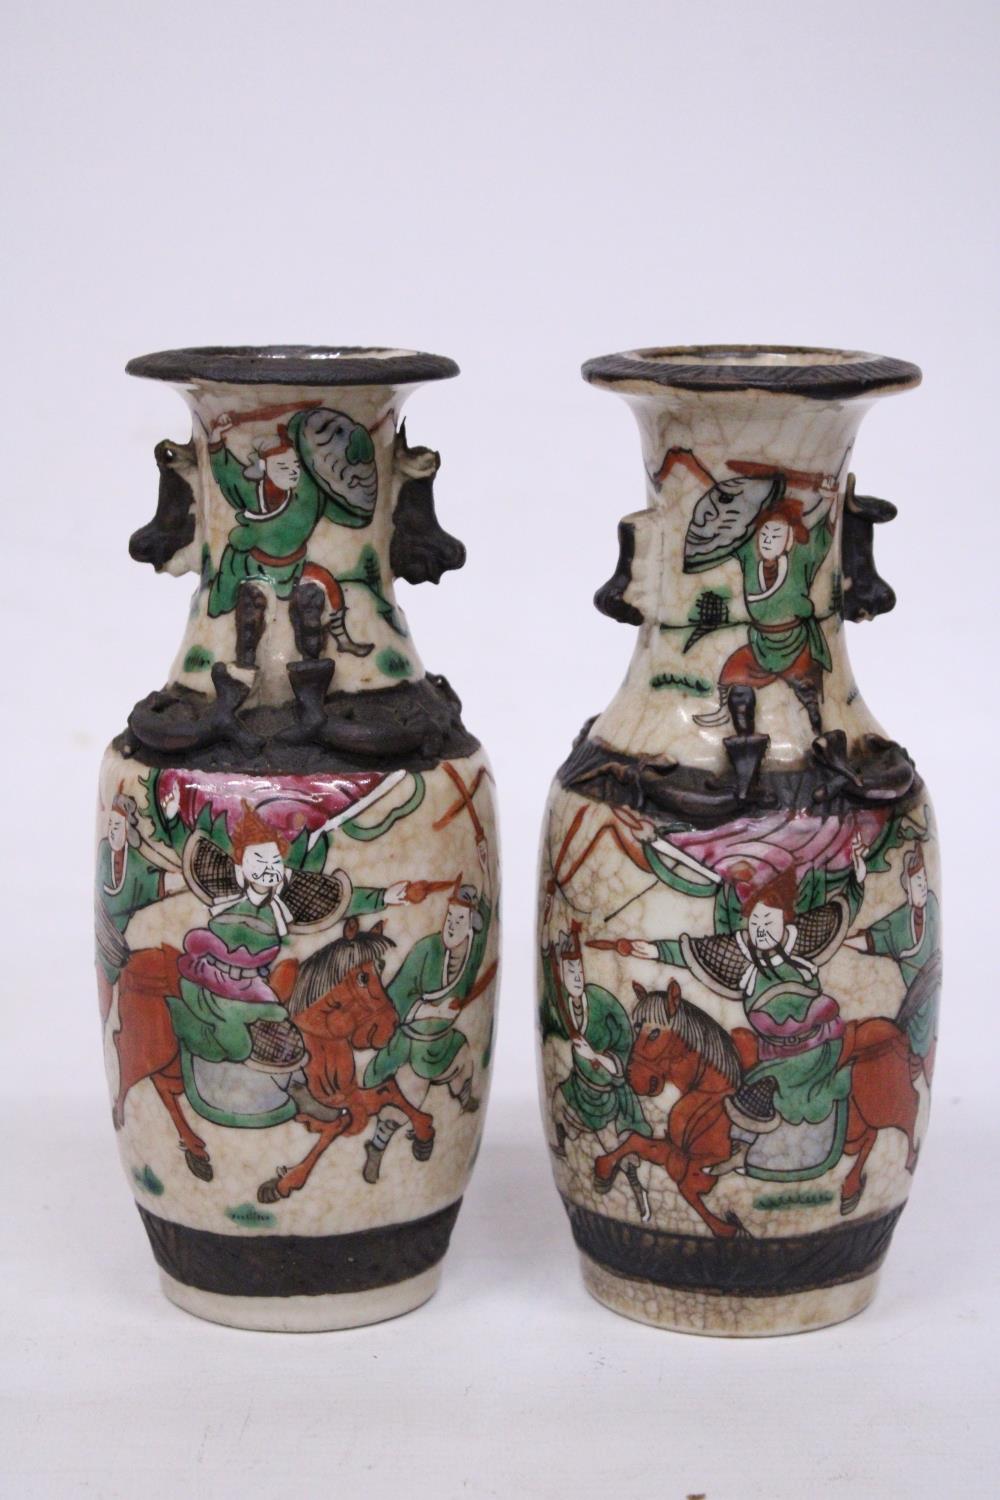 A PAIR OF CHINESE CRACKLE GLAZED VASES WITH WARRIOR SCENES - 18 CM (H) - MARK TO BASE